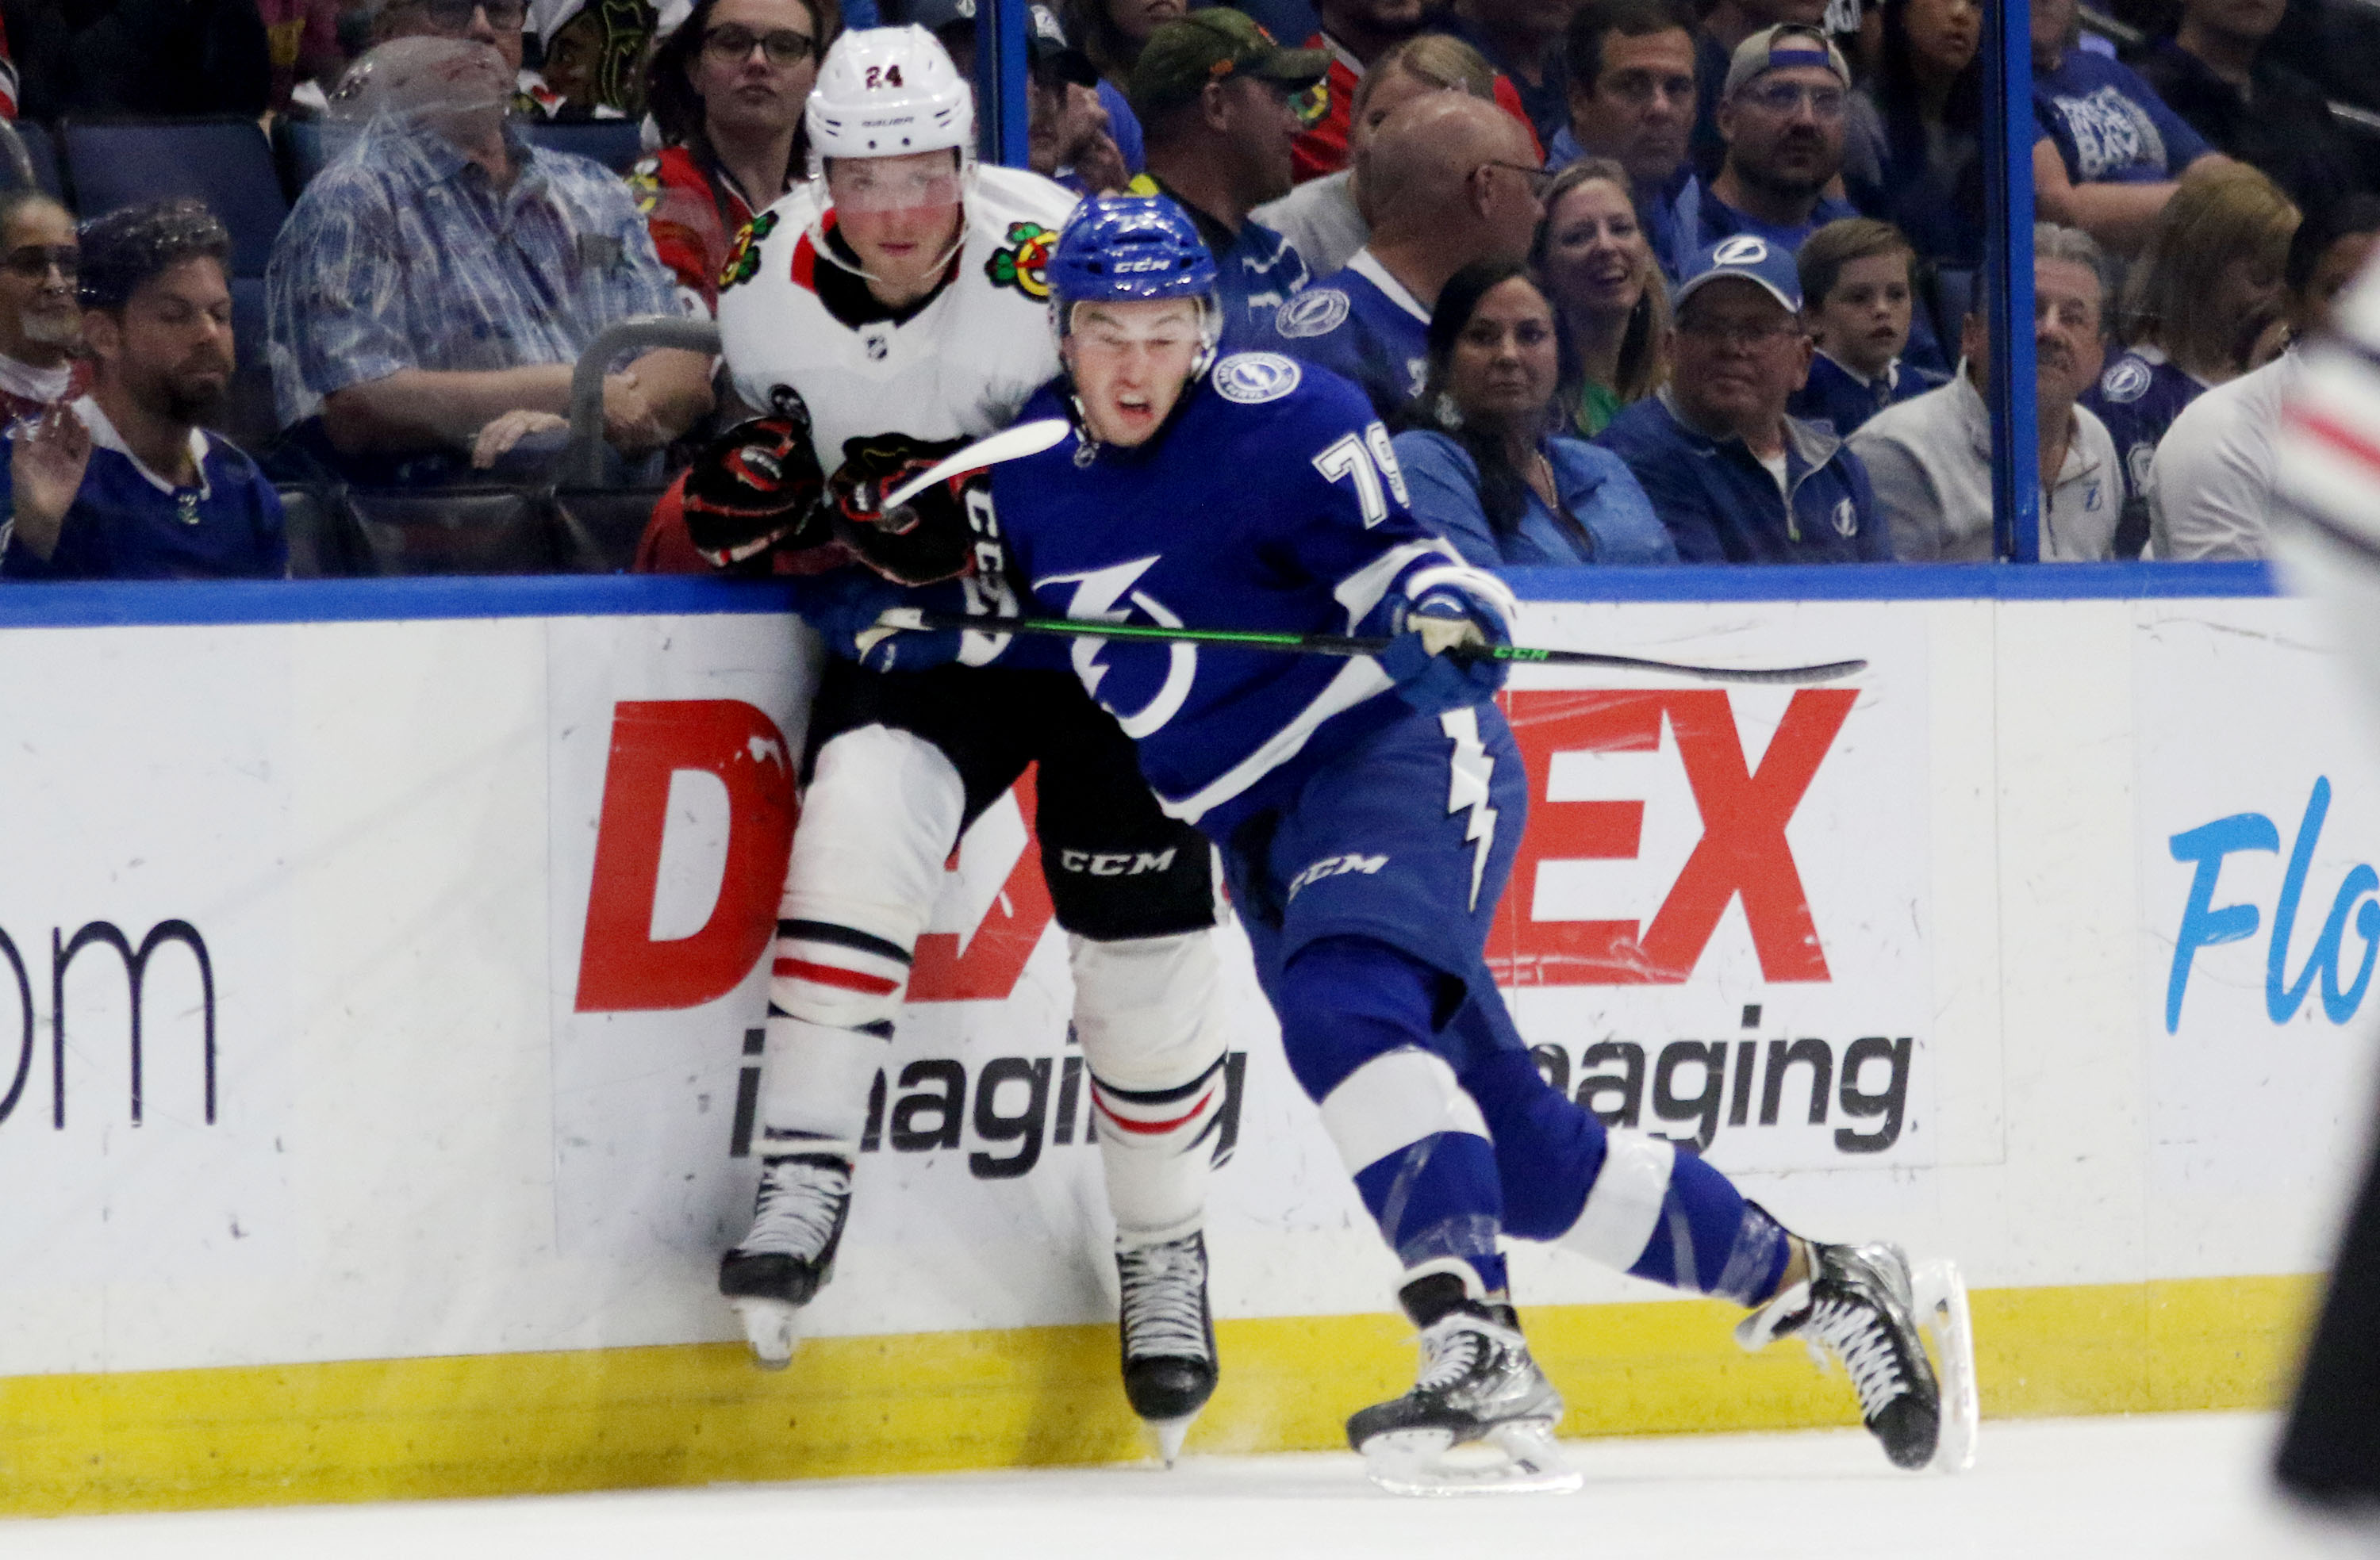 NHL 2013 Realignment: Tampa Bay Lightning's New Divisional Rivals